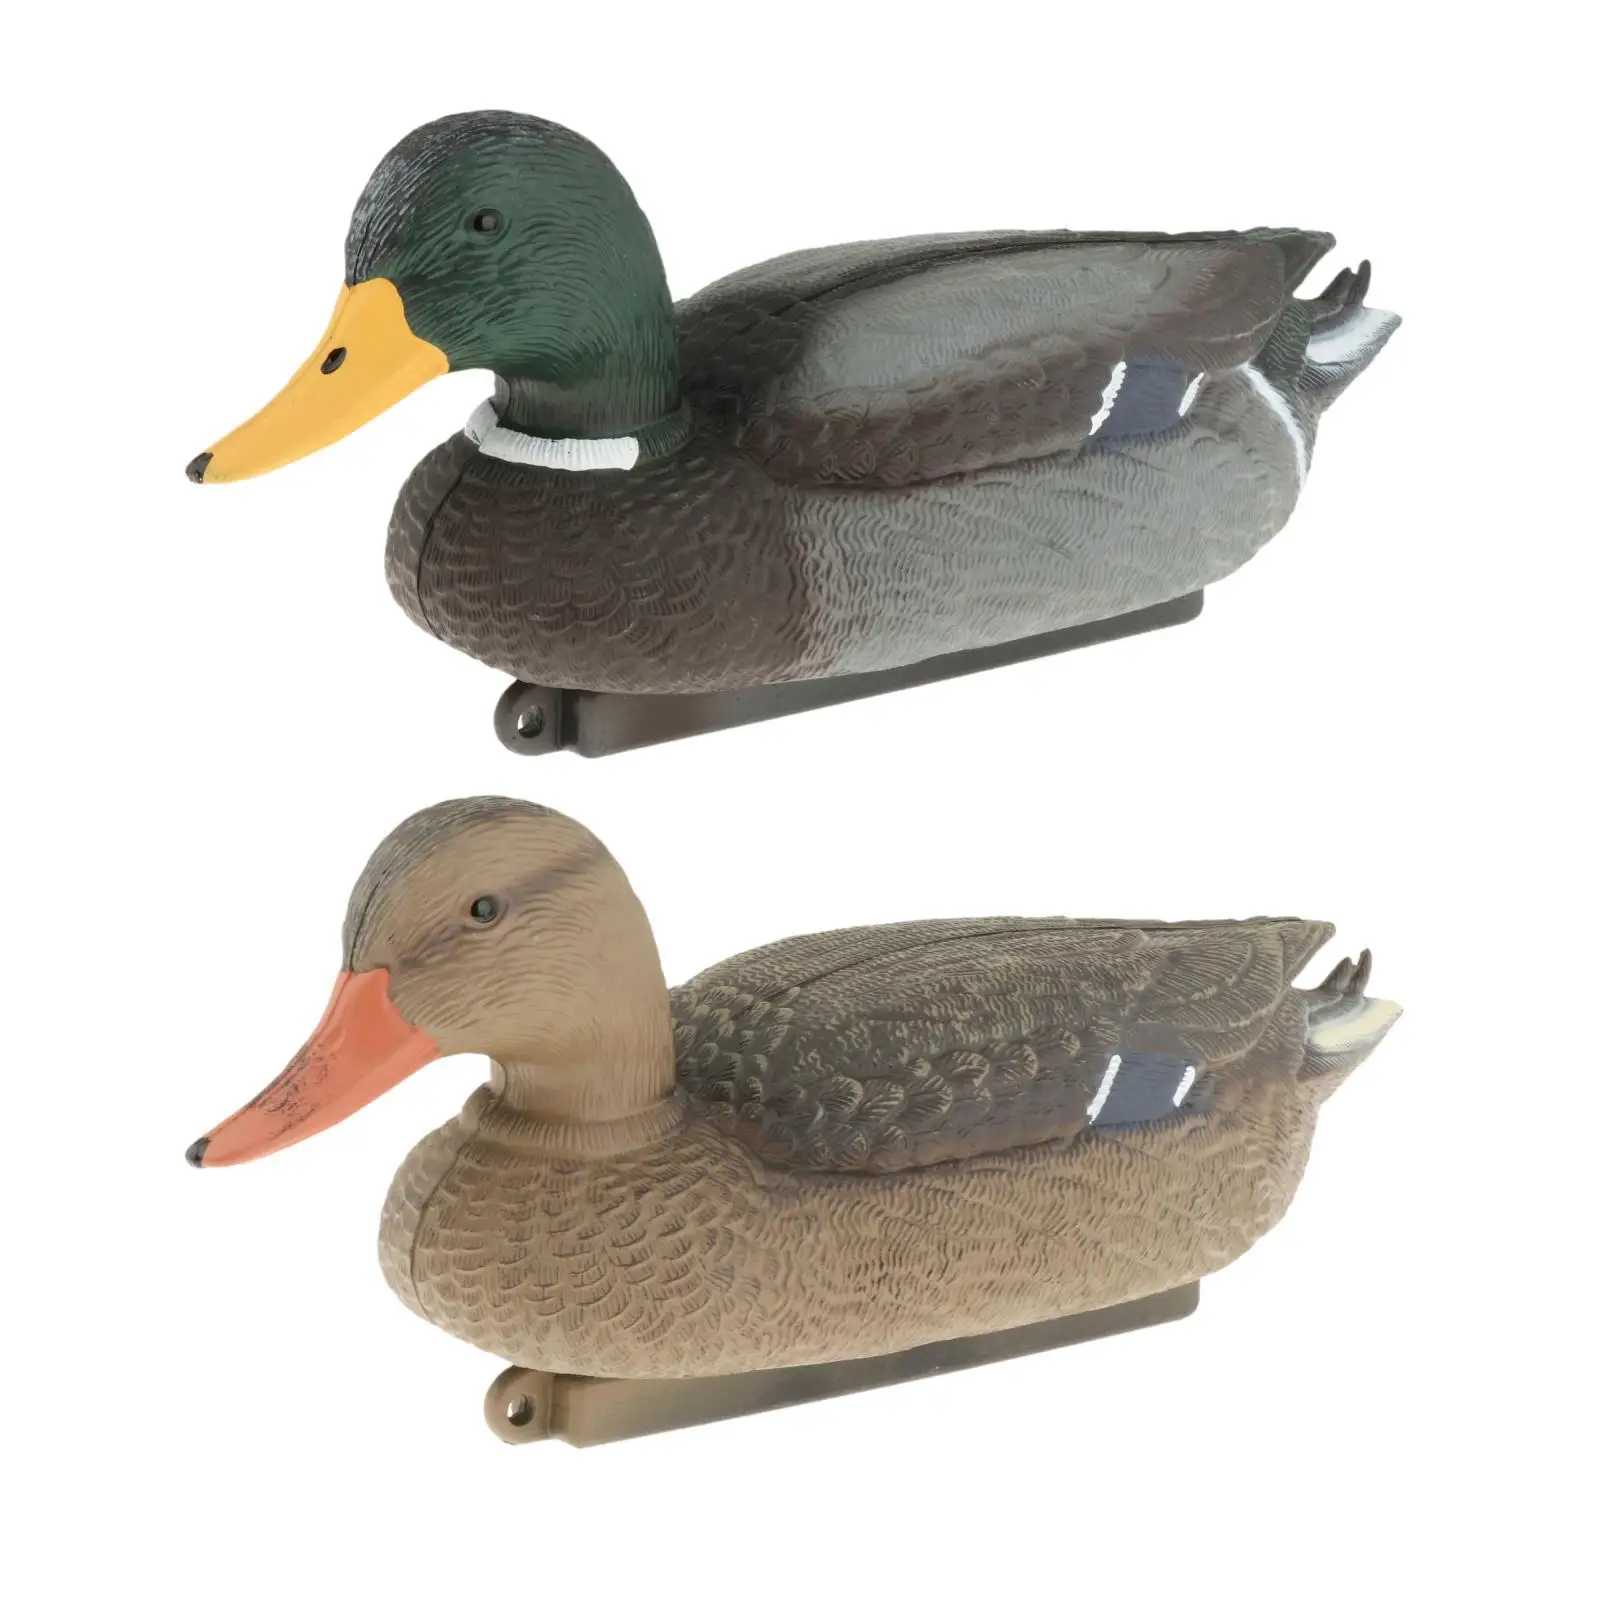 Floating Hunting Duck Decoy Realistic Simulation Decoy for Pond Garden Pool